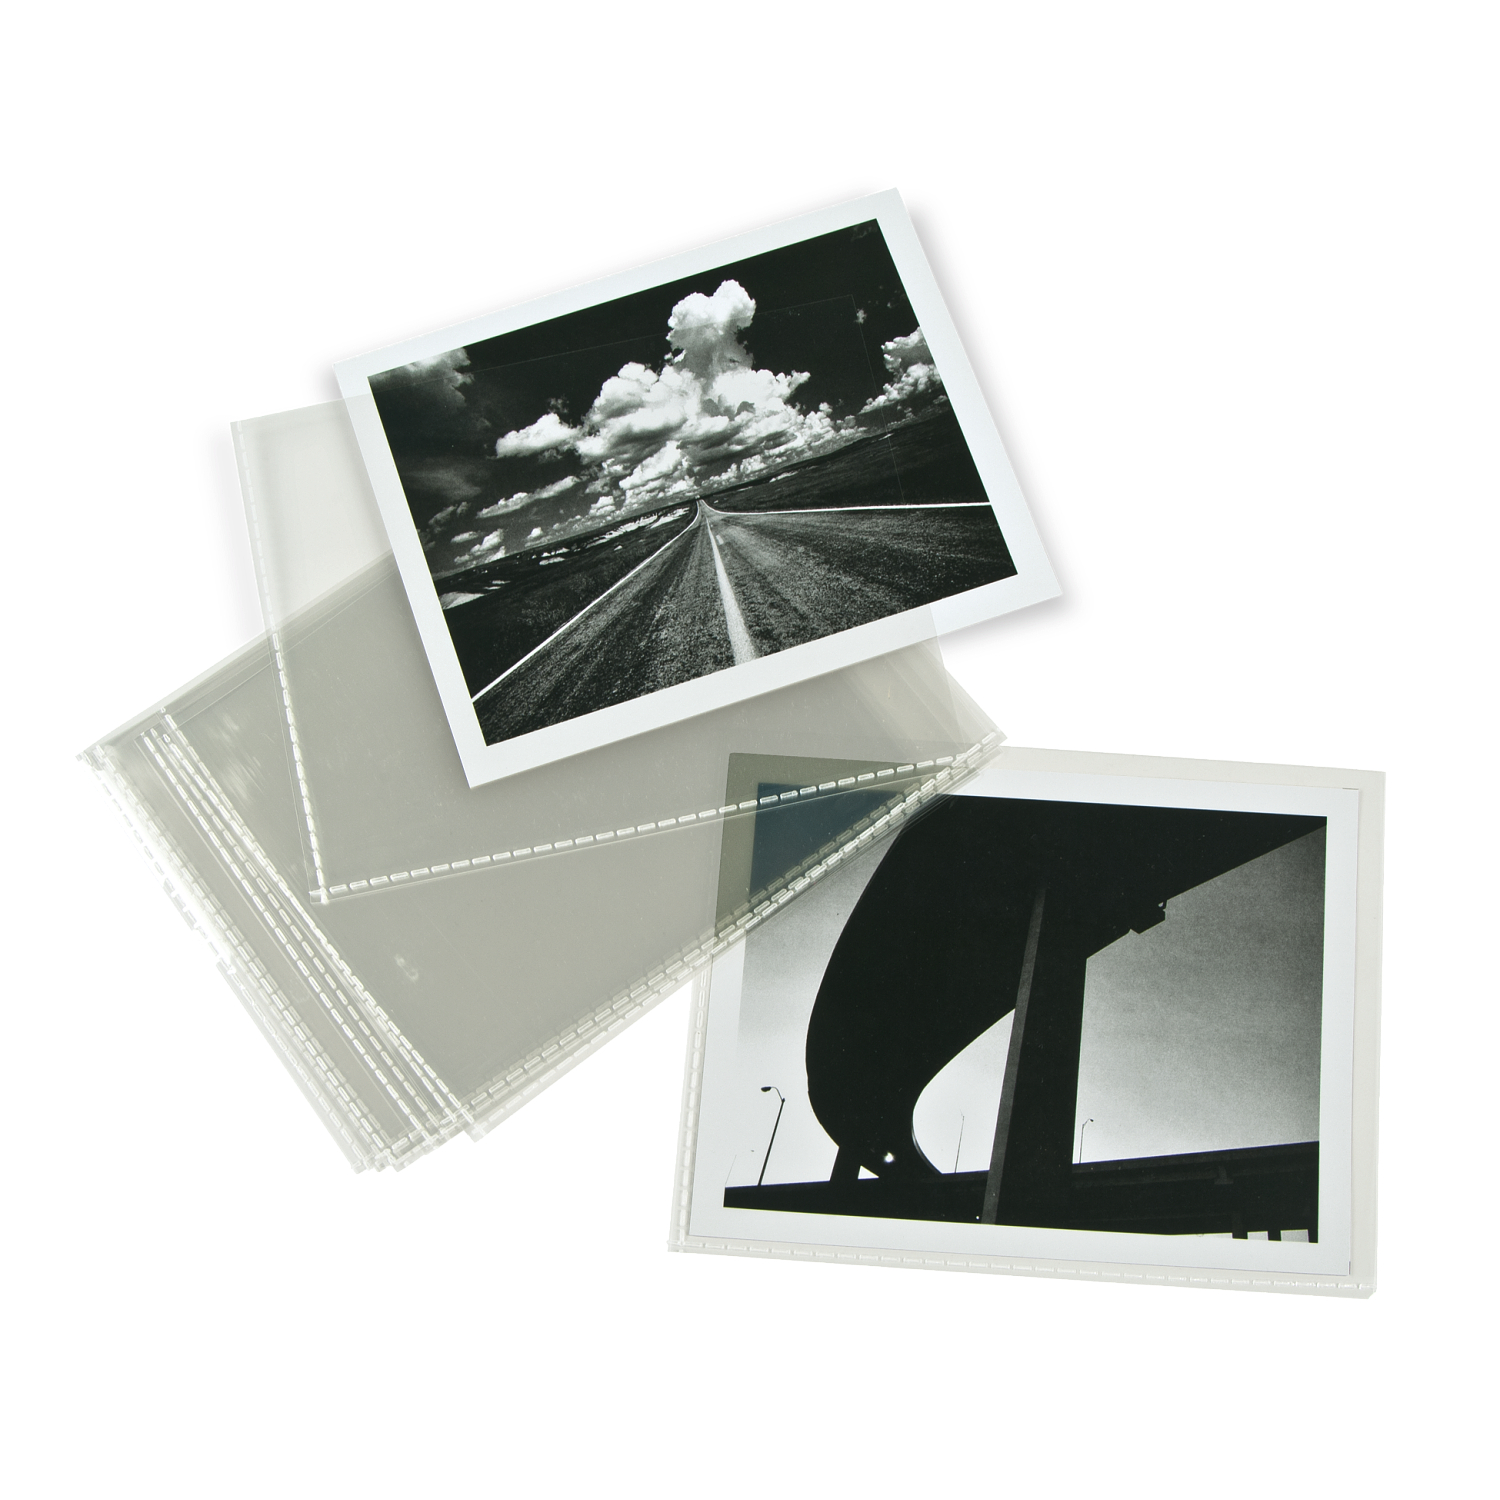 Gaylord Archival 3 mil Archival Polyester L-Sleeves for Photos & Documents  (10-Pack) - Fits up to 8 1/2 x 11